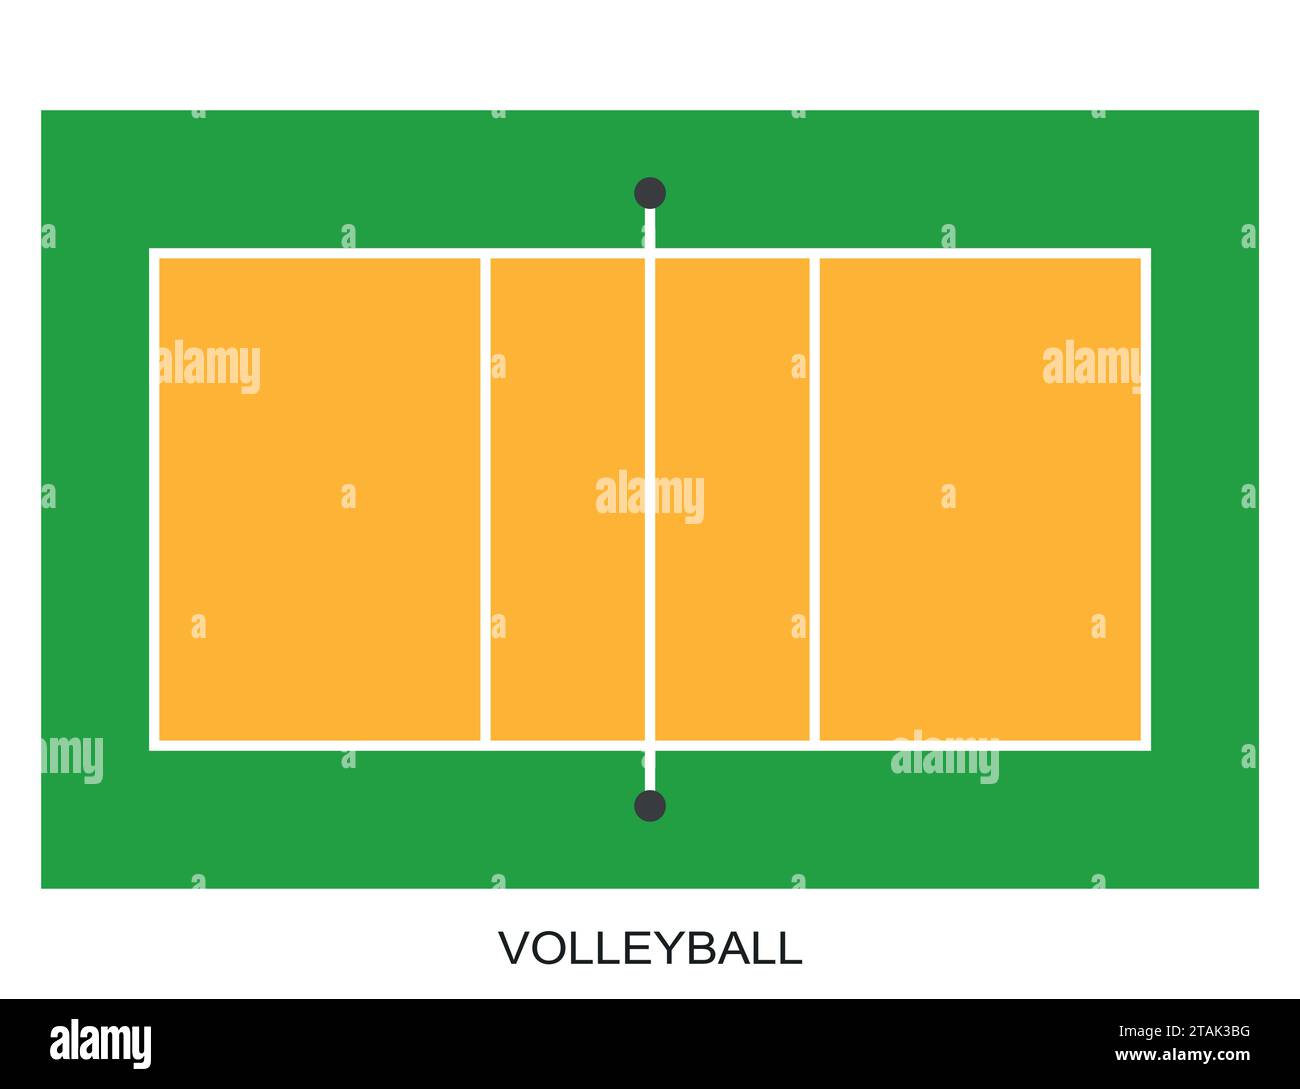 Premium Vector | Volleyball court dimensions size guide, illustration  layout scheme